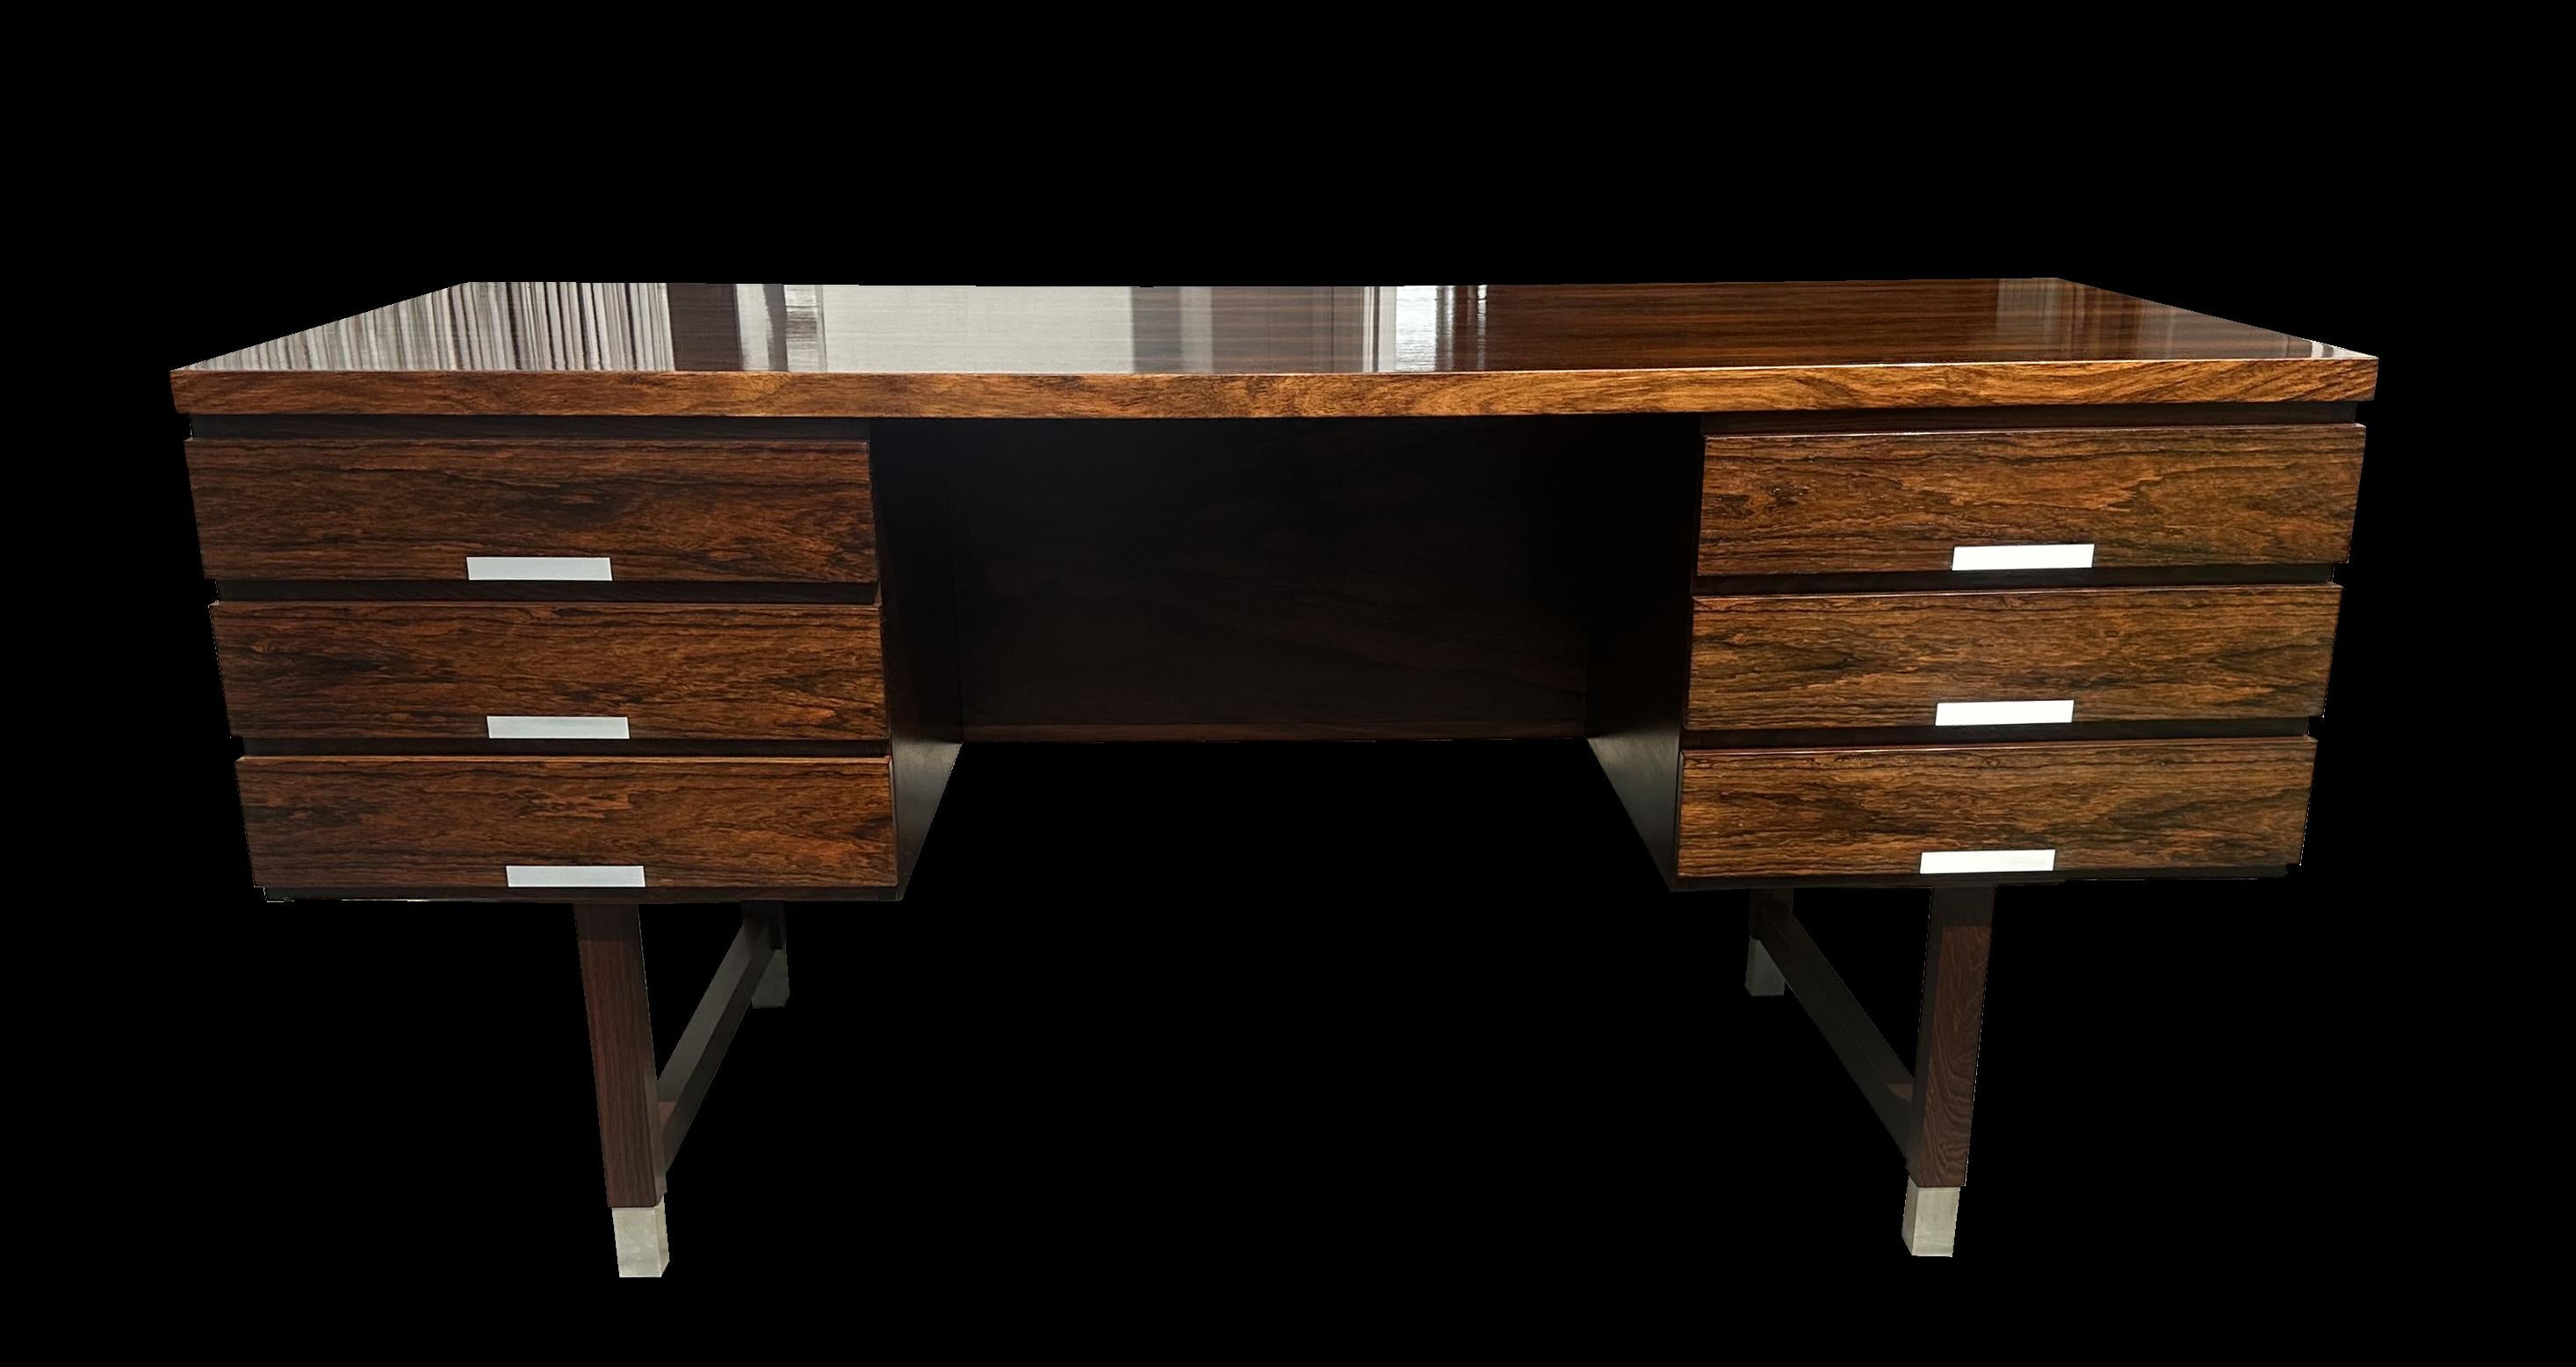 This is a very nice desk by Danish designer Kai Kristiansen, in Santos Rosewood (Machaerium Scleroxylon a sustainable species not on endangered timber lists so no problem for import/export)
with Aluminium accents on the drawer pulls and feet